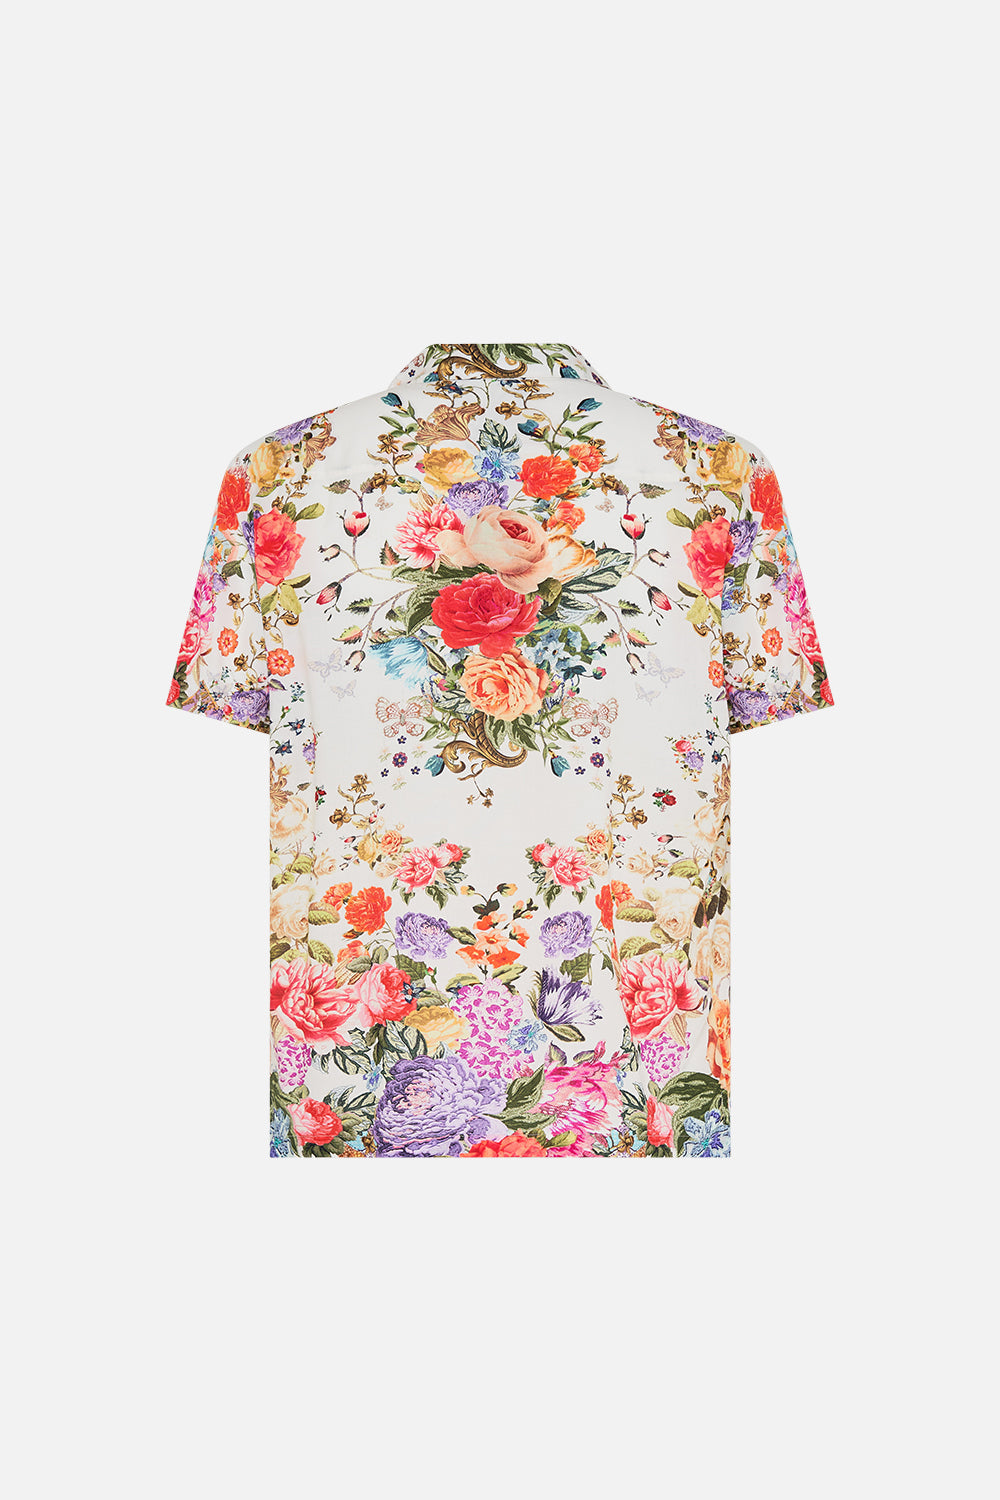 CAMILLA floral short sleeve camp collared shirt in Sew Yesterday